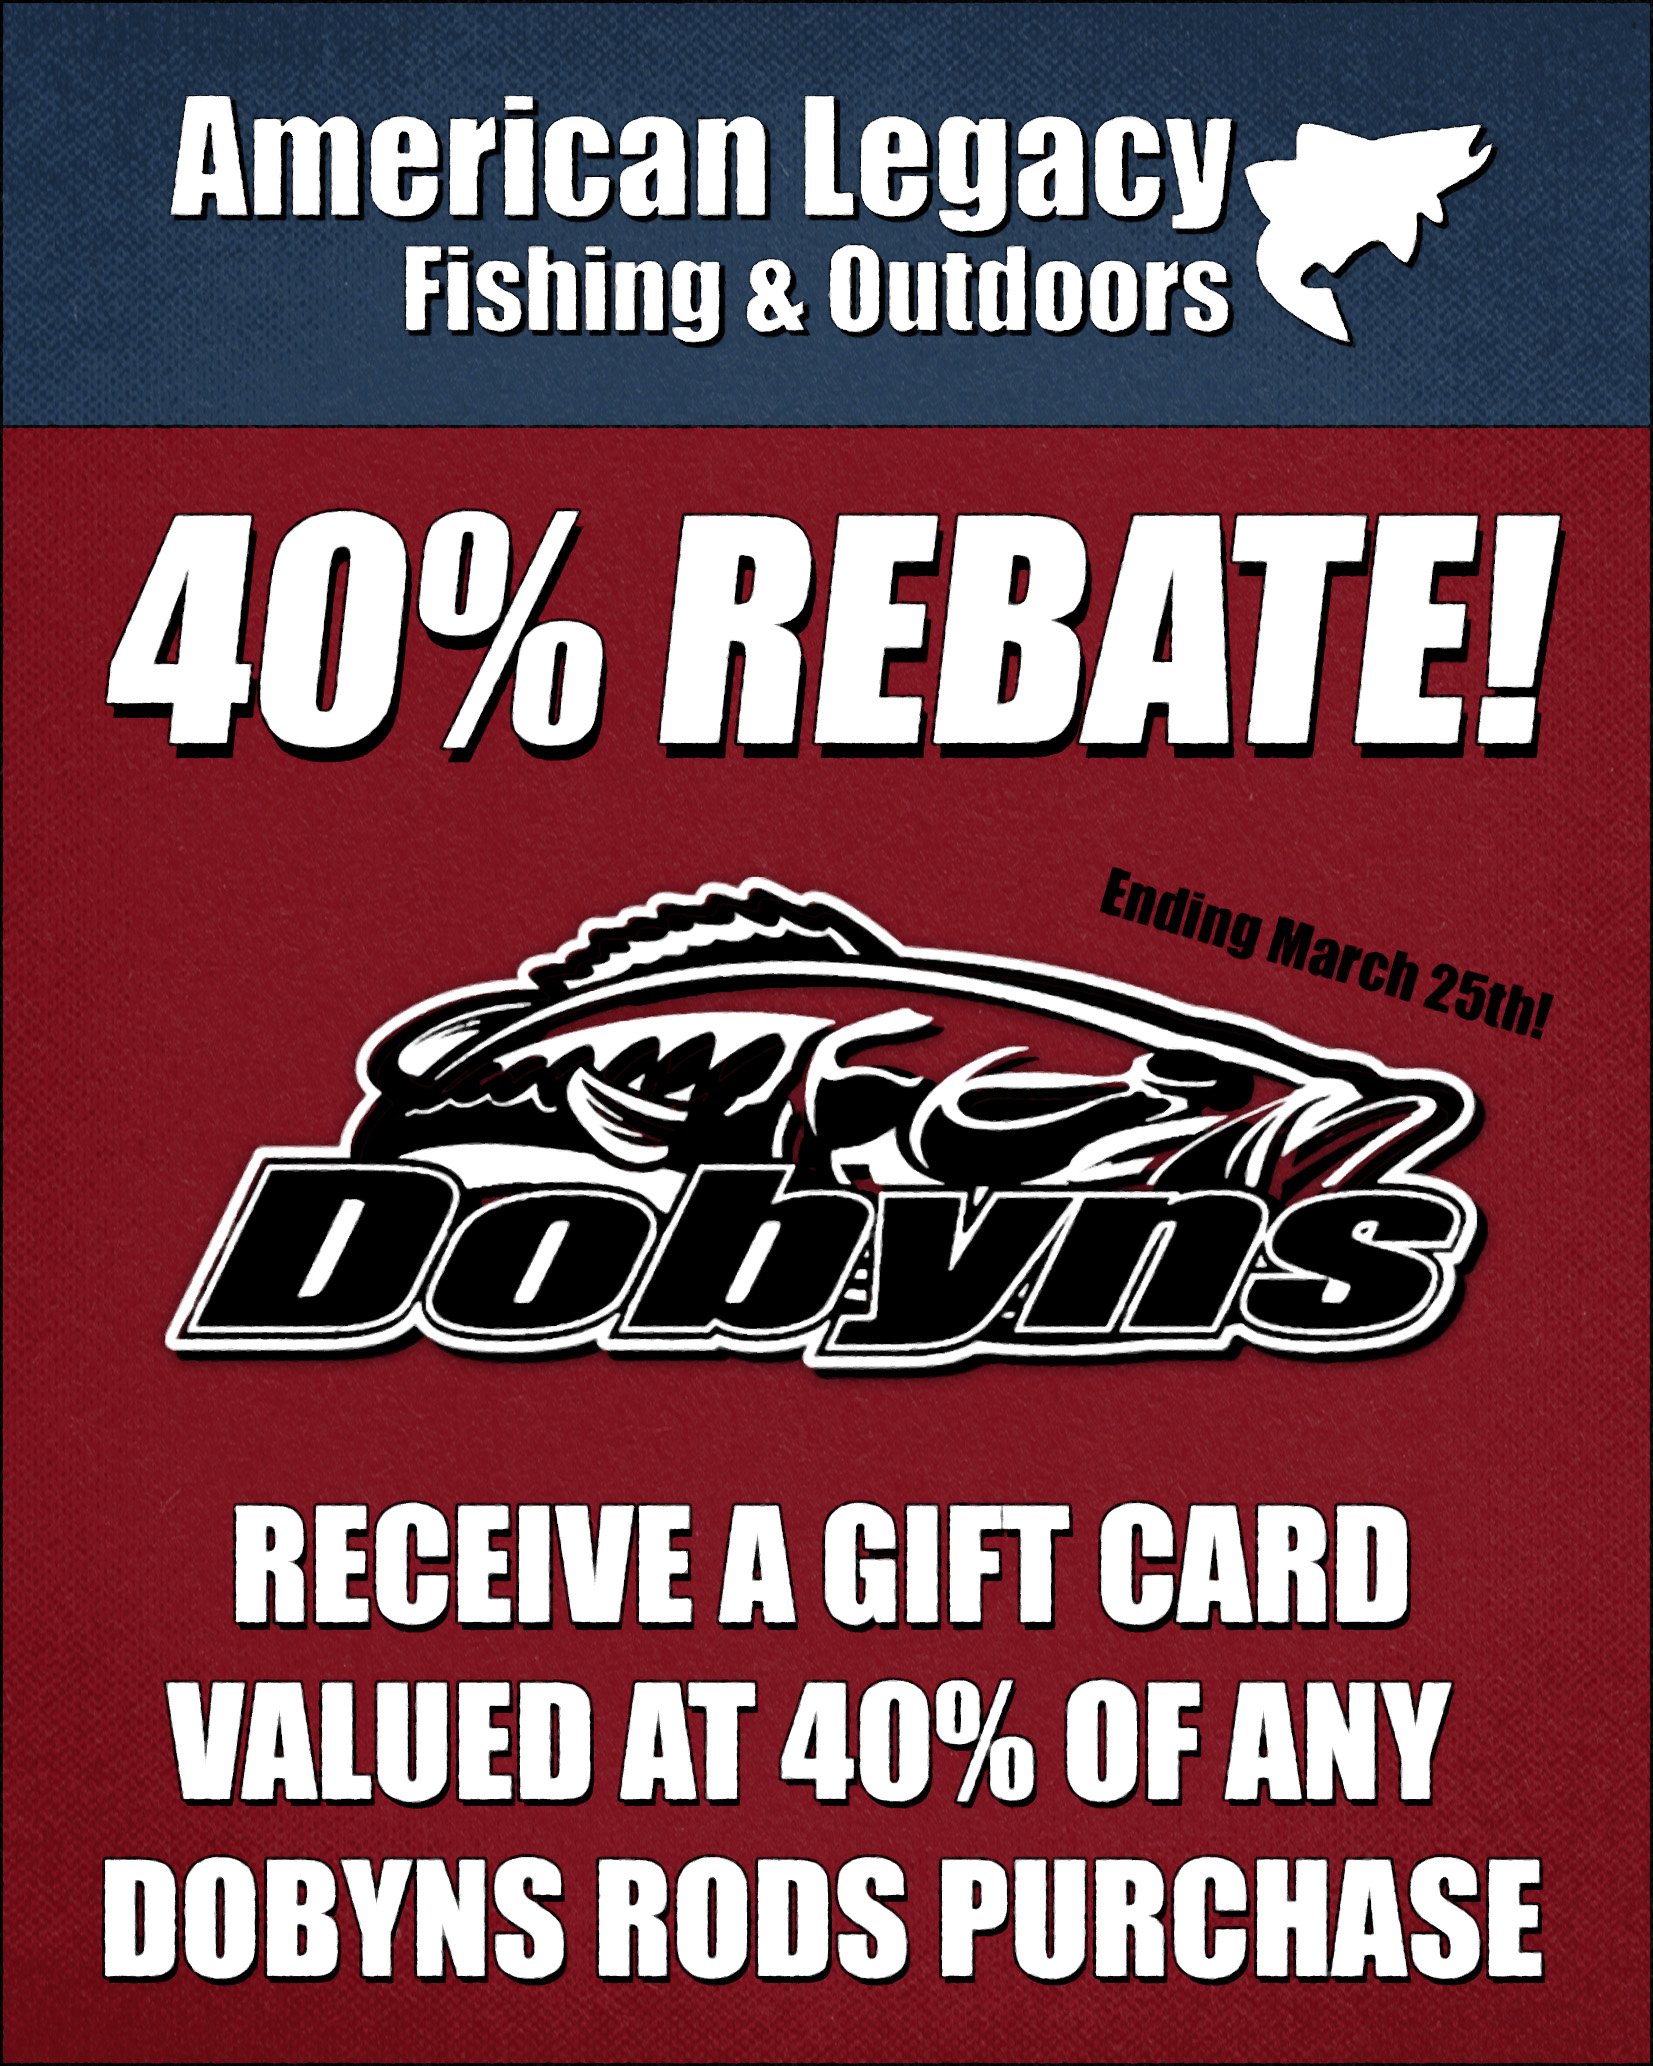 40% Rebate on Dobyns Rods - American Legacy Fishing, G Loomis Superstore